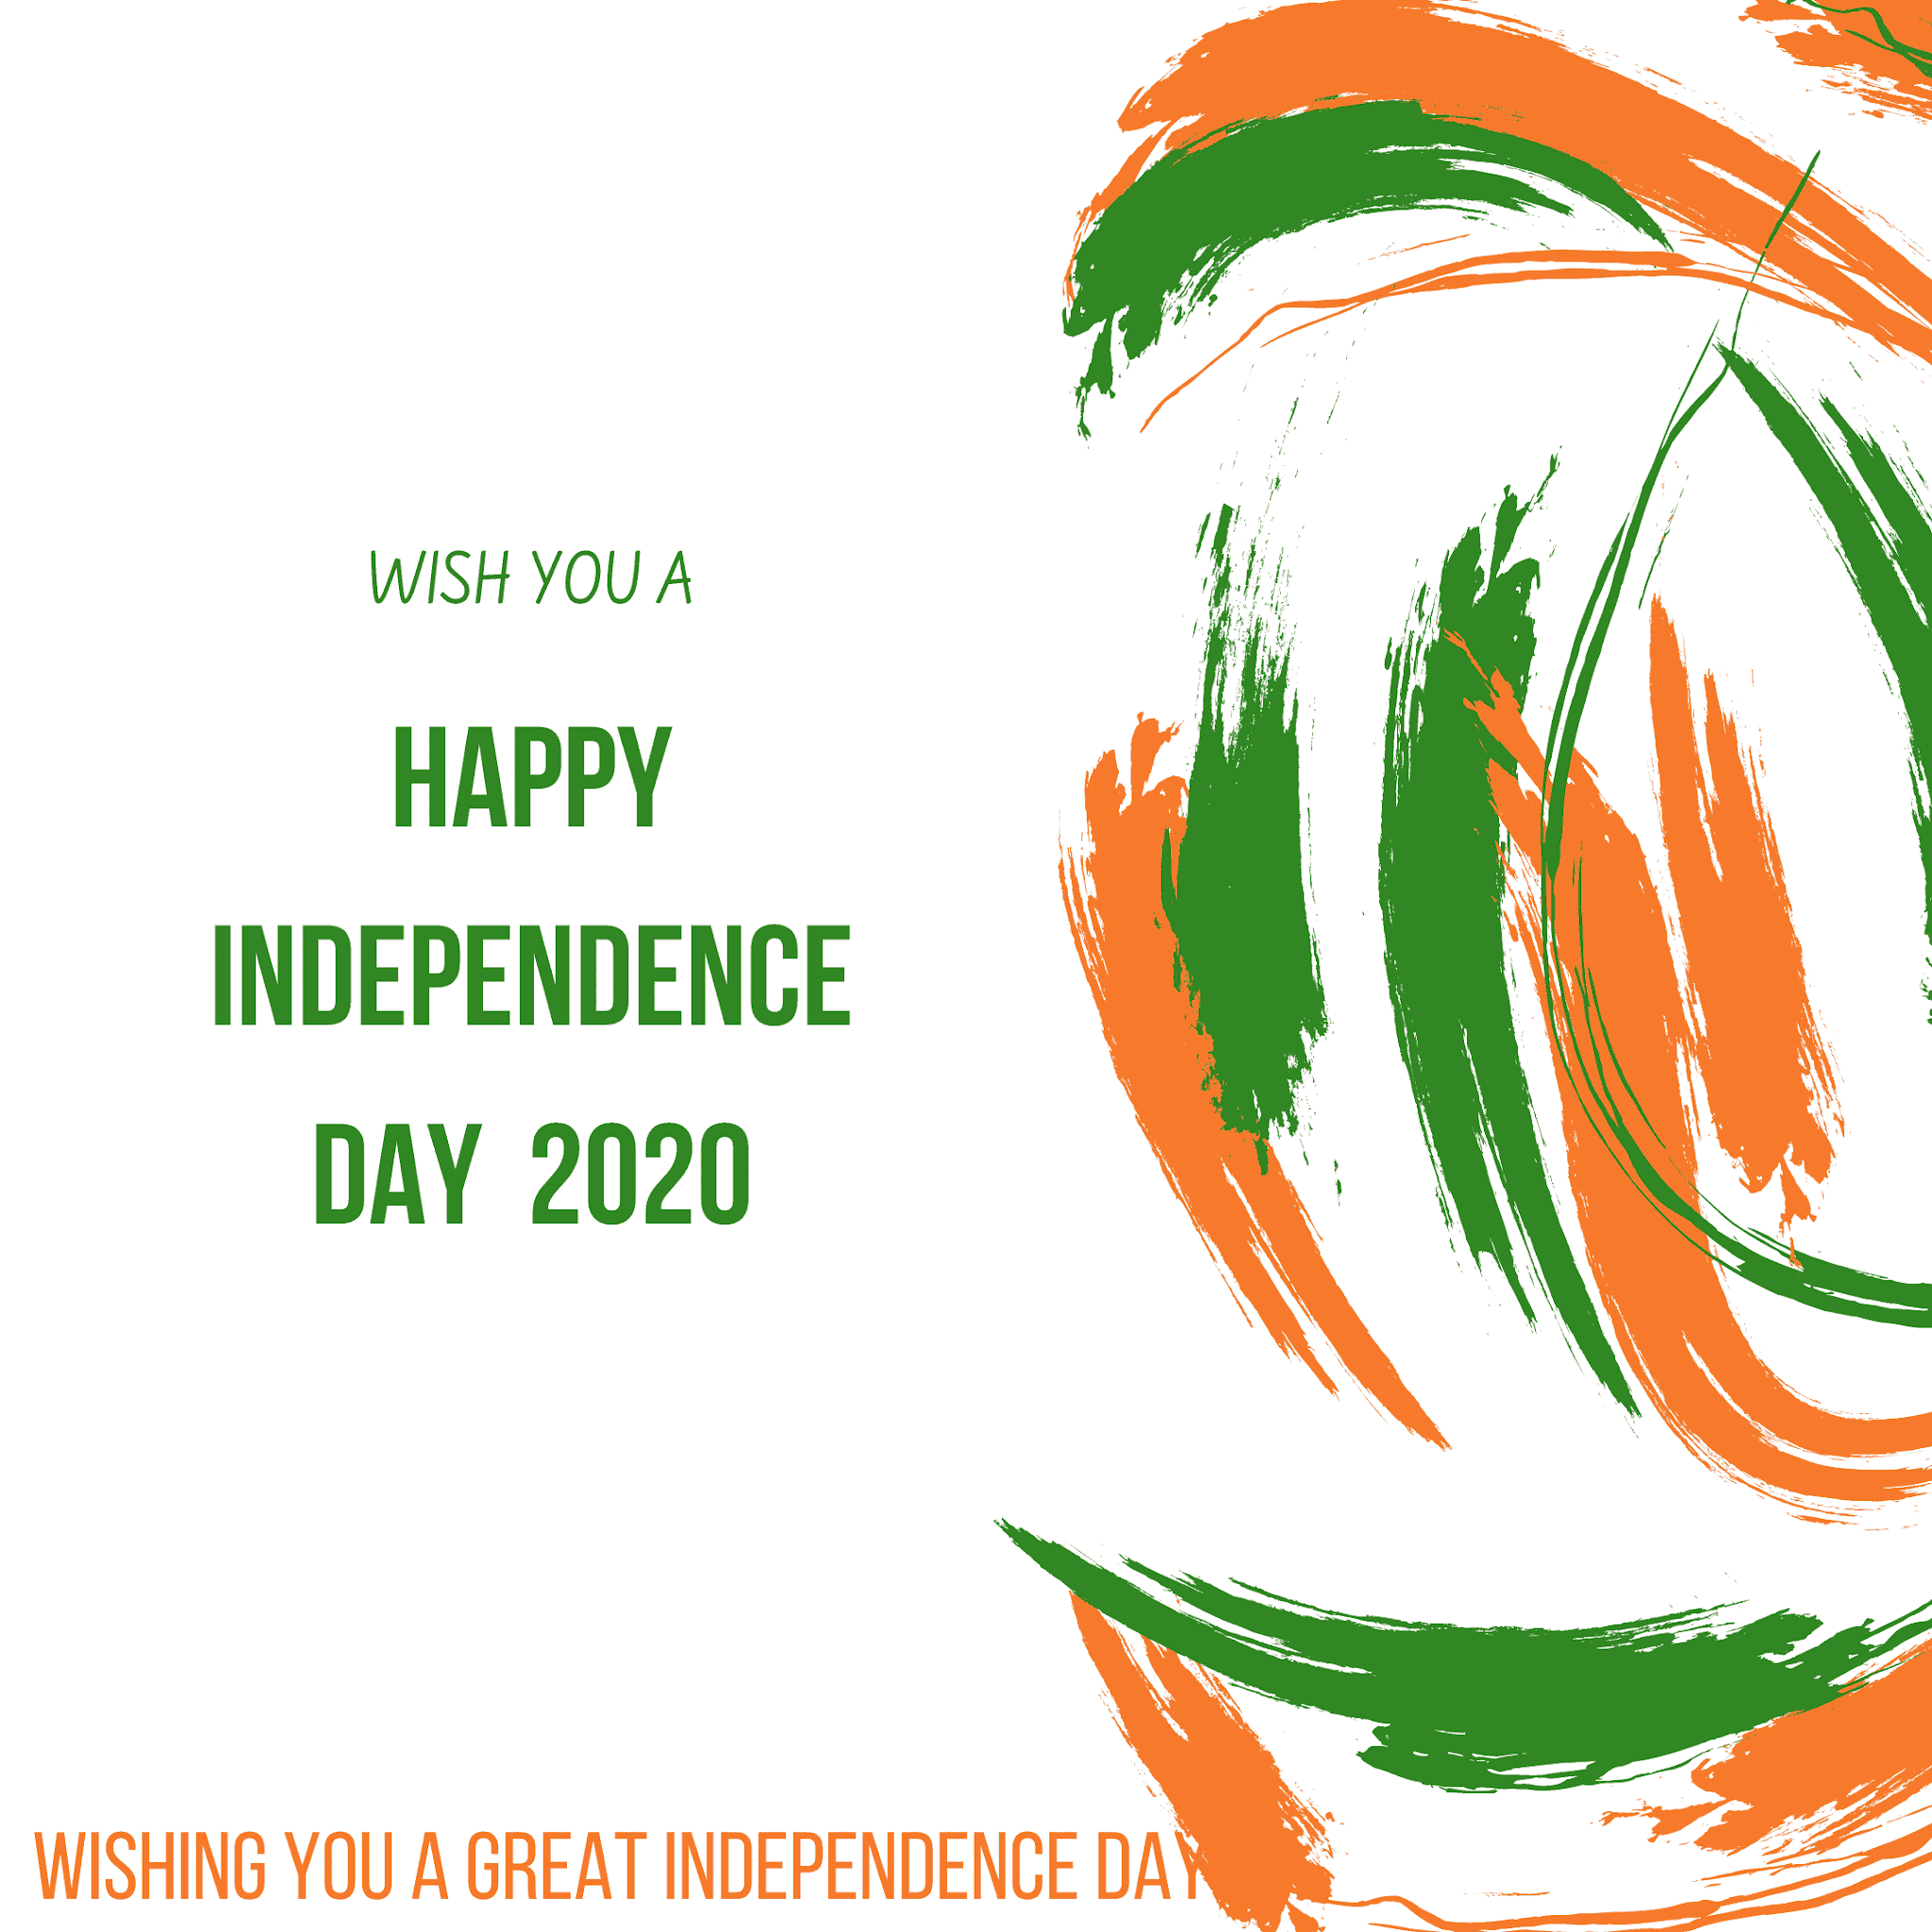 Happy Independence Day 2020 Image: Share independence day image